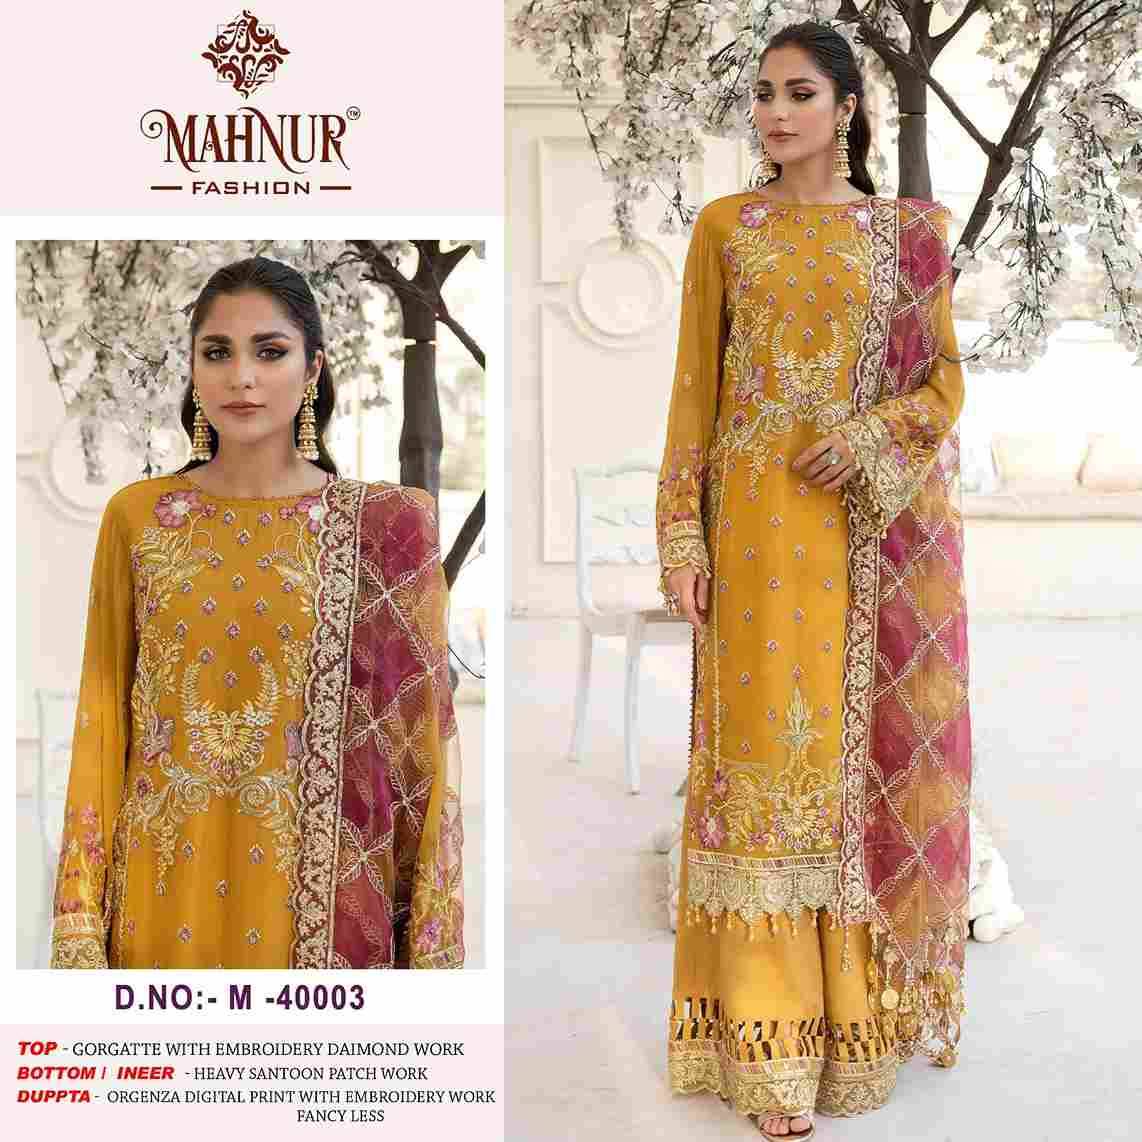 Mahnur Vol-40 By Mahnur Fashion 40001 To 40003 Series Beautiful Pakistani Suits Colorful Stylish Fancy Casual Wear & Ethnic Wear Heavy Georgette Dresses At Wholesale Price